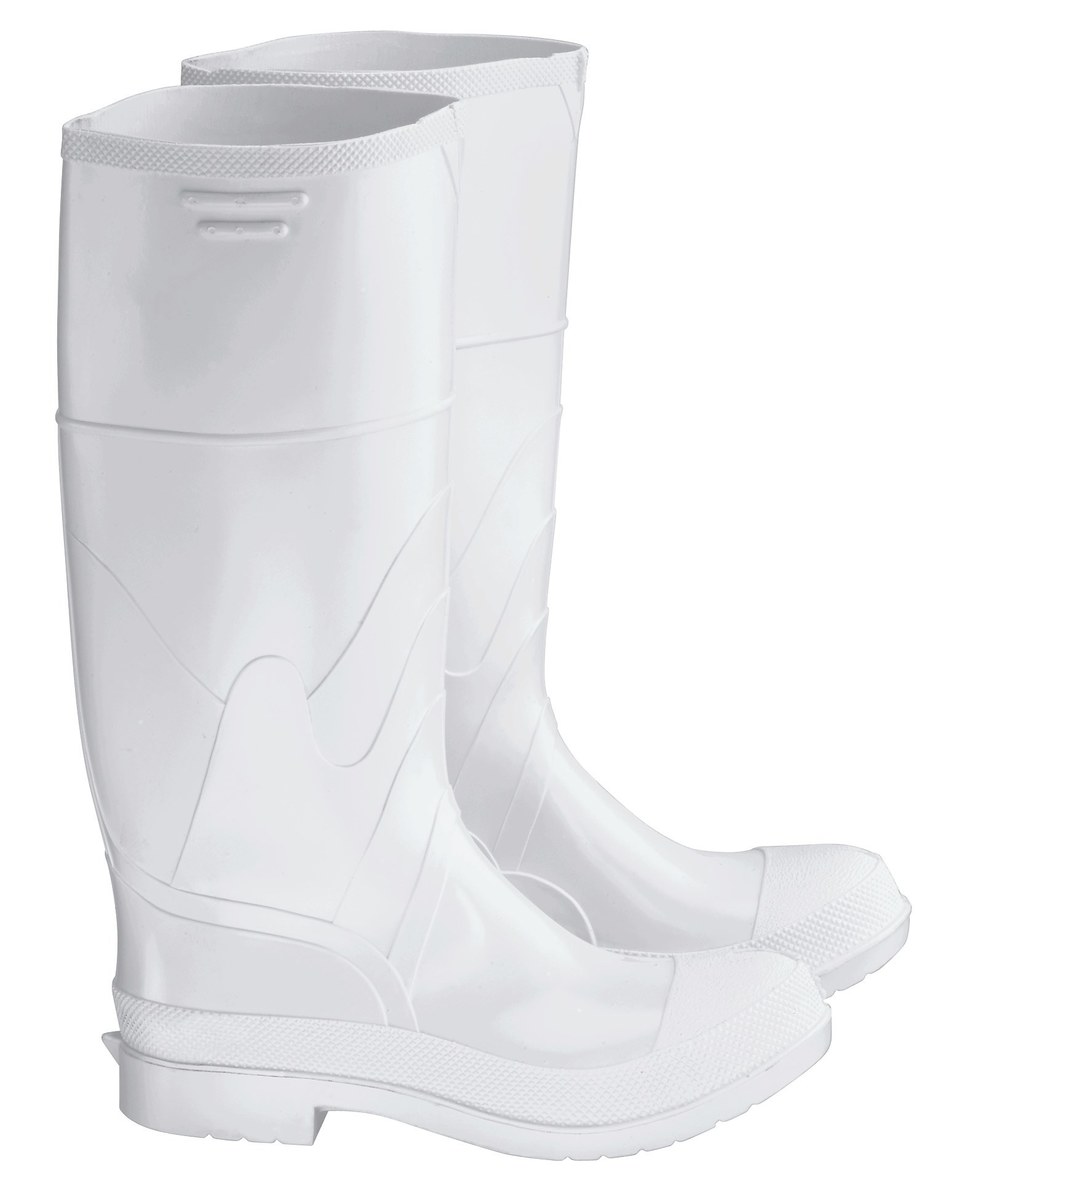 white dunlop boots